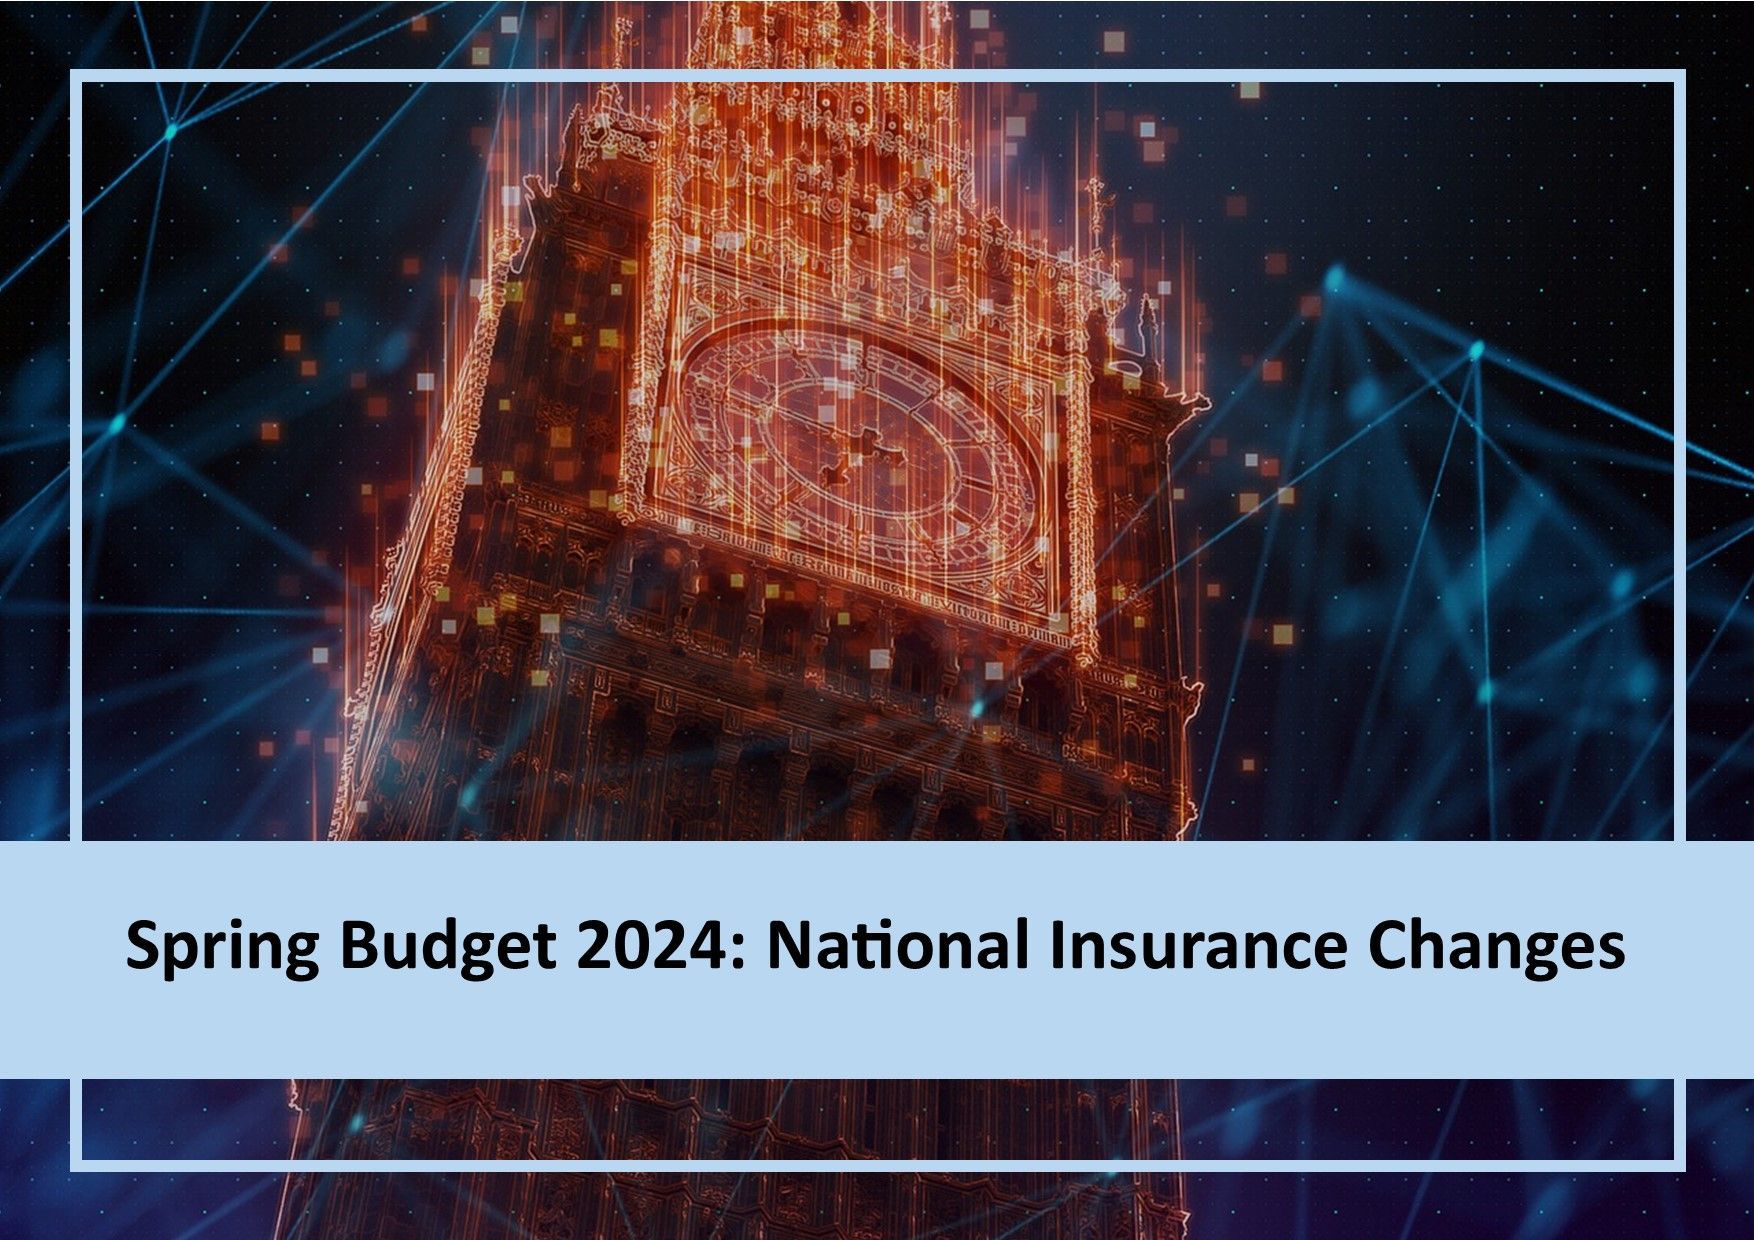 a poster for the spring budget 2024 national insurance changes